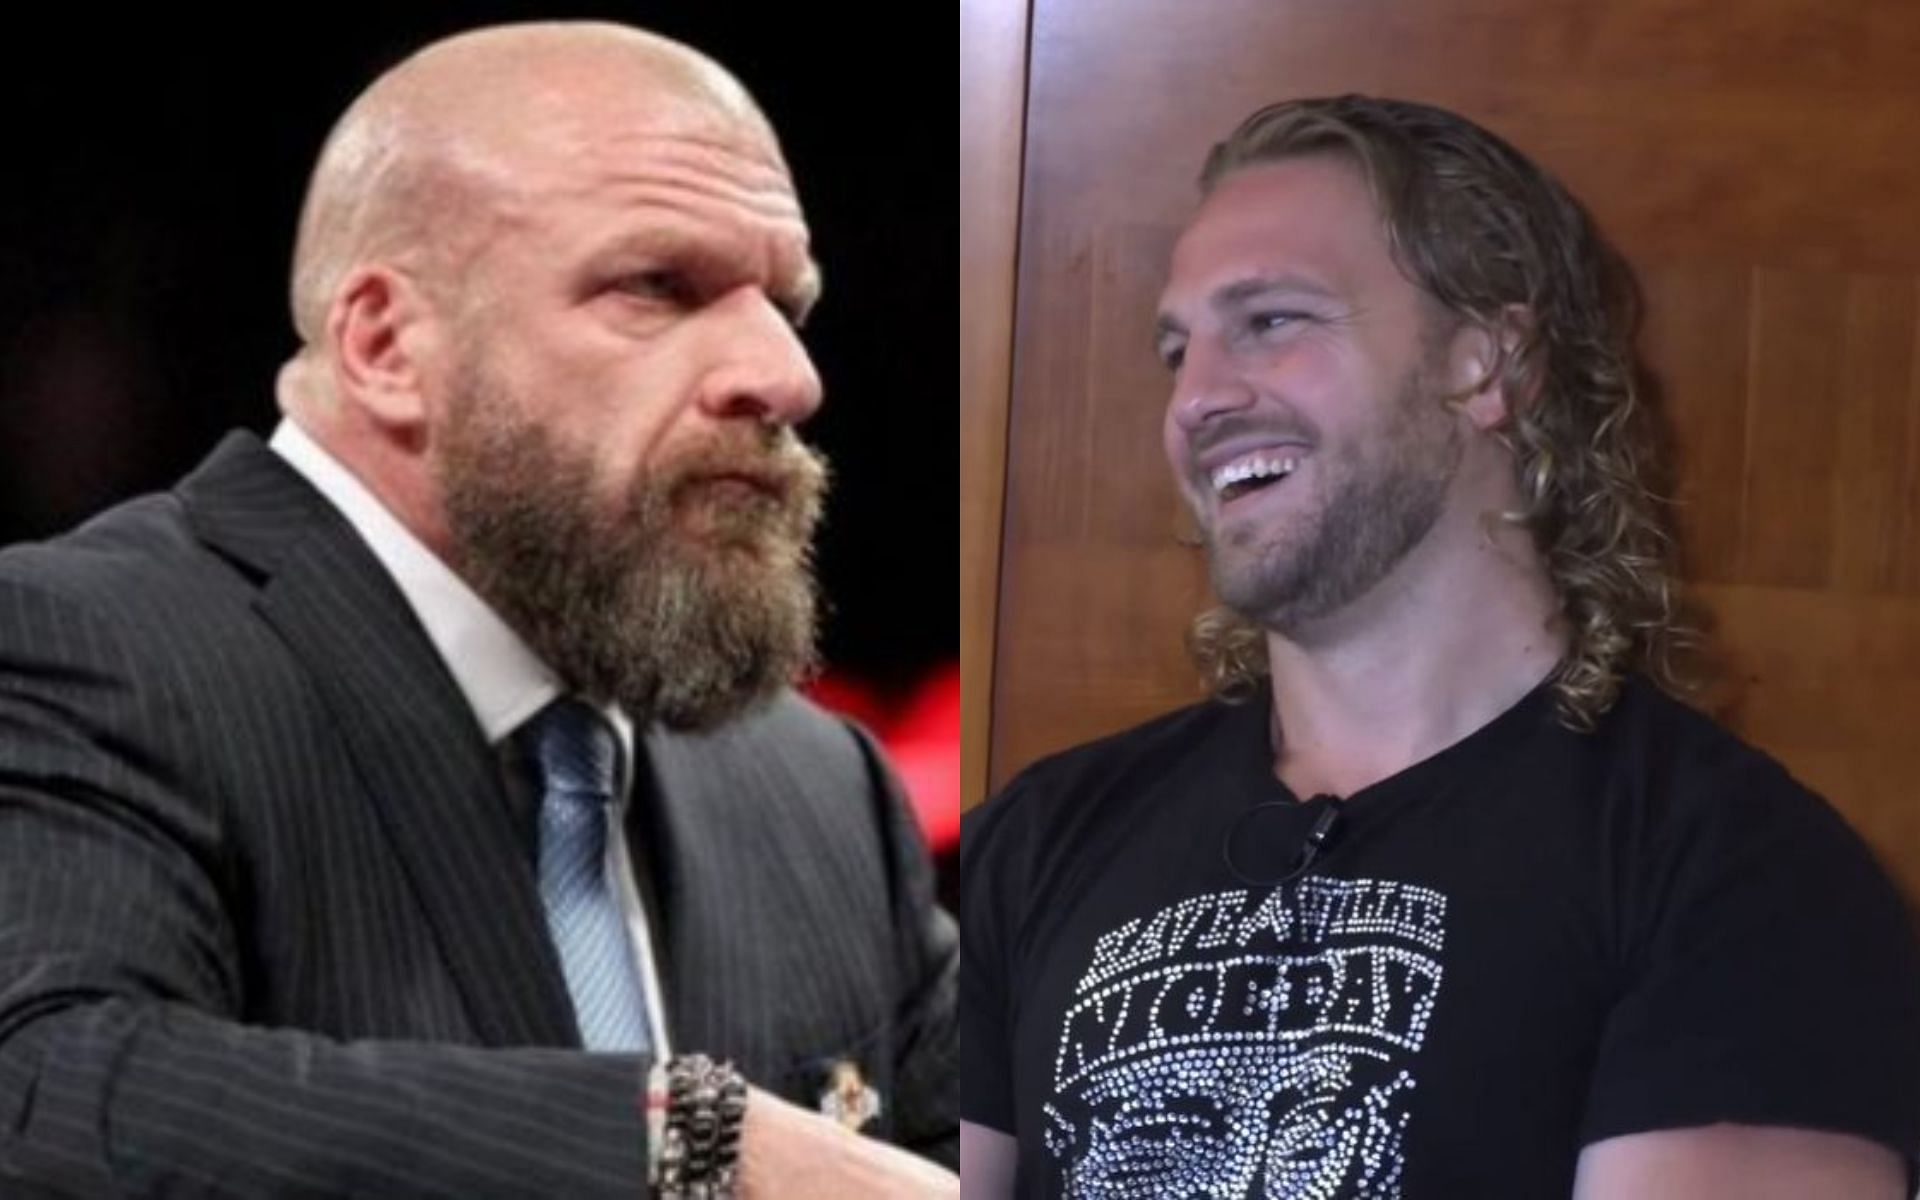 WWE Head of Creative Triple H (left) and AEW star Hangman Page (right).